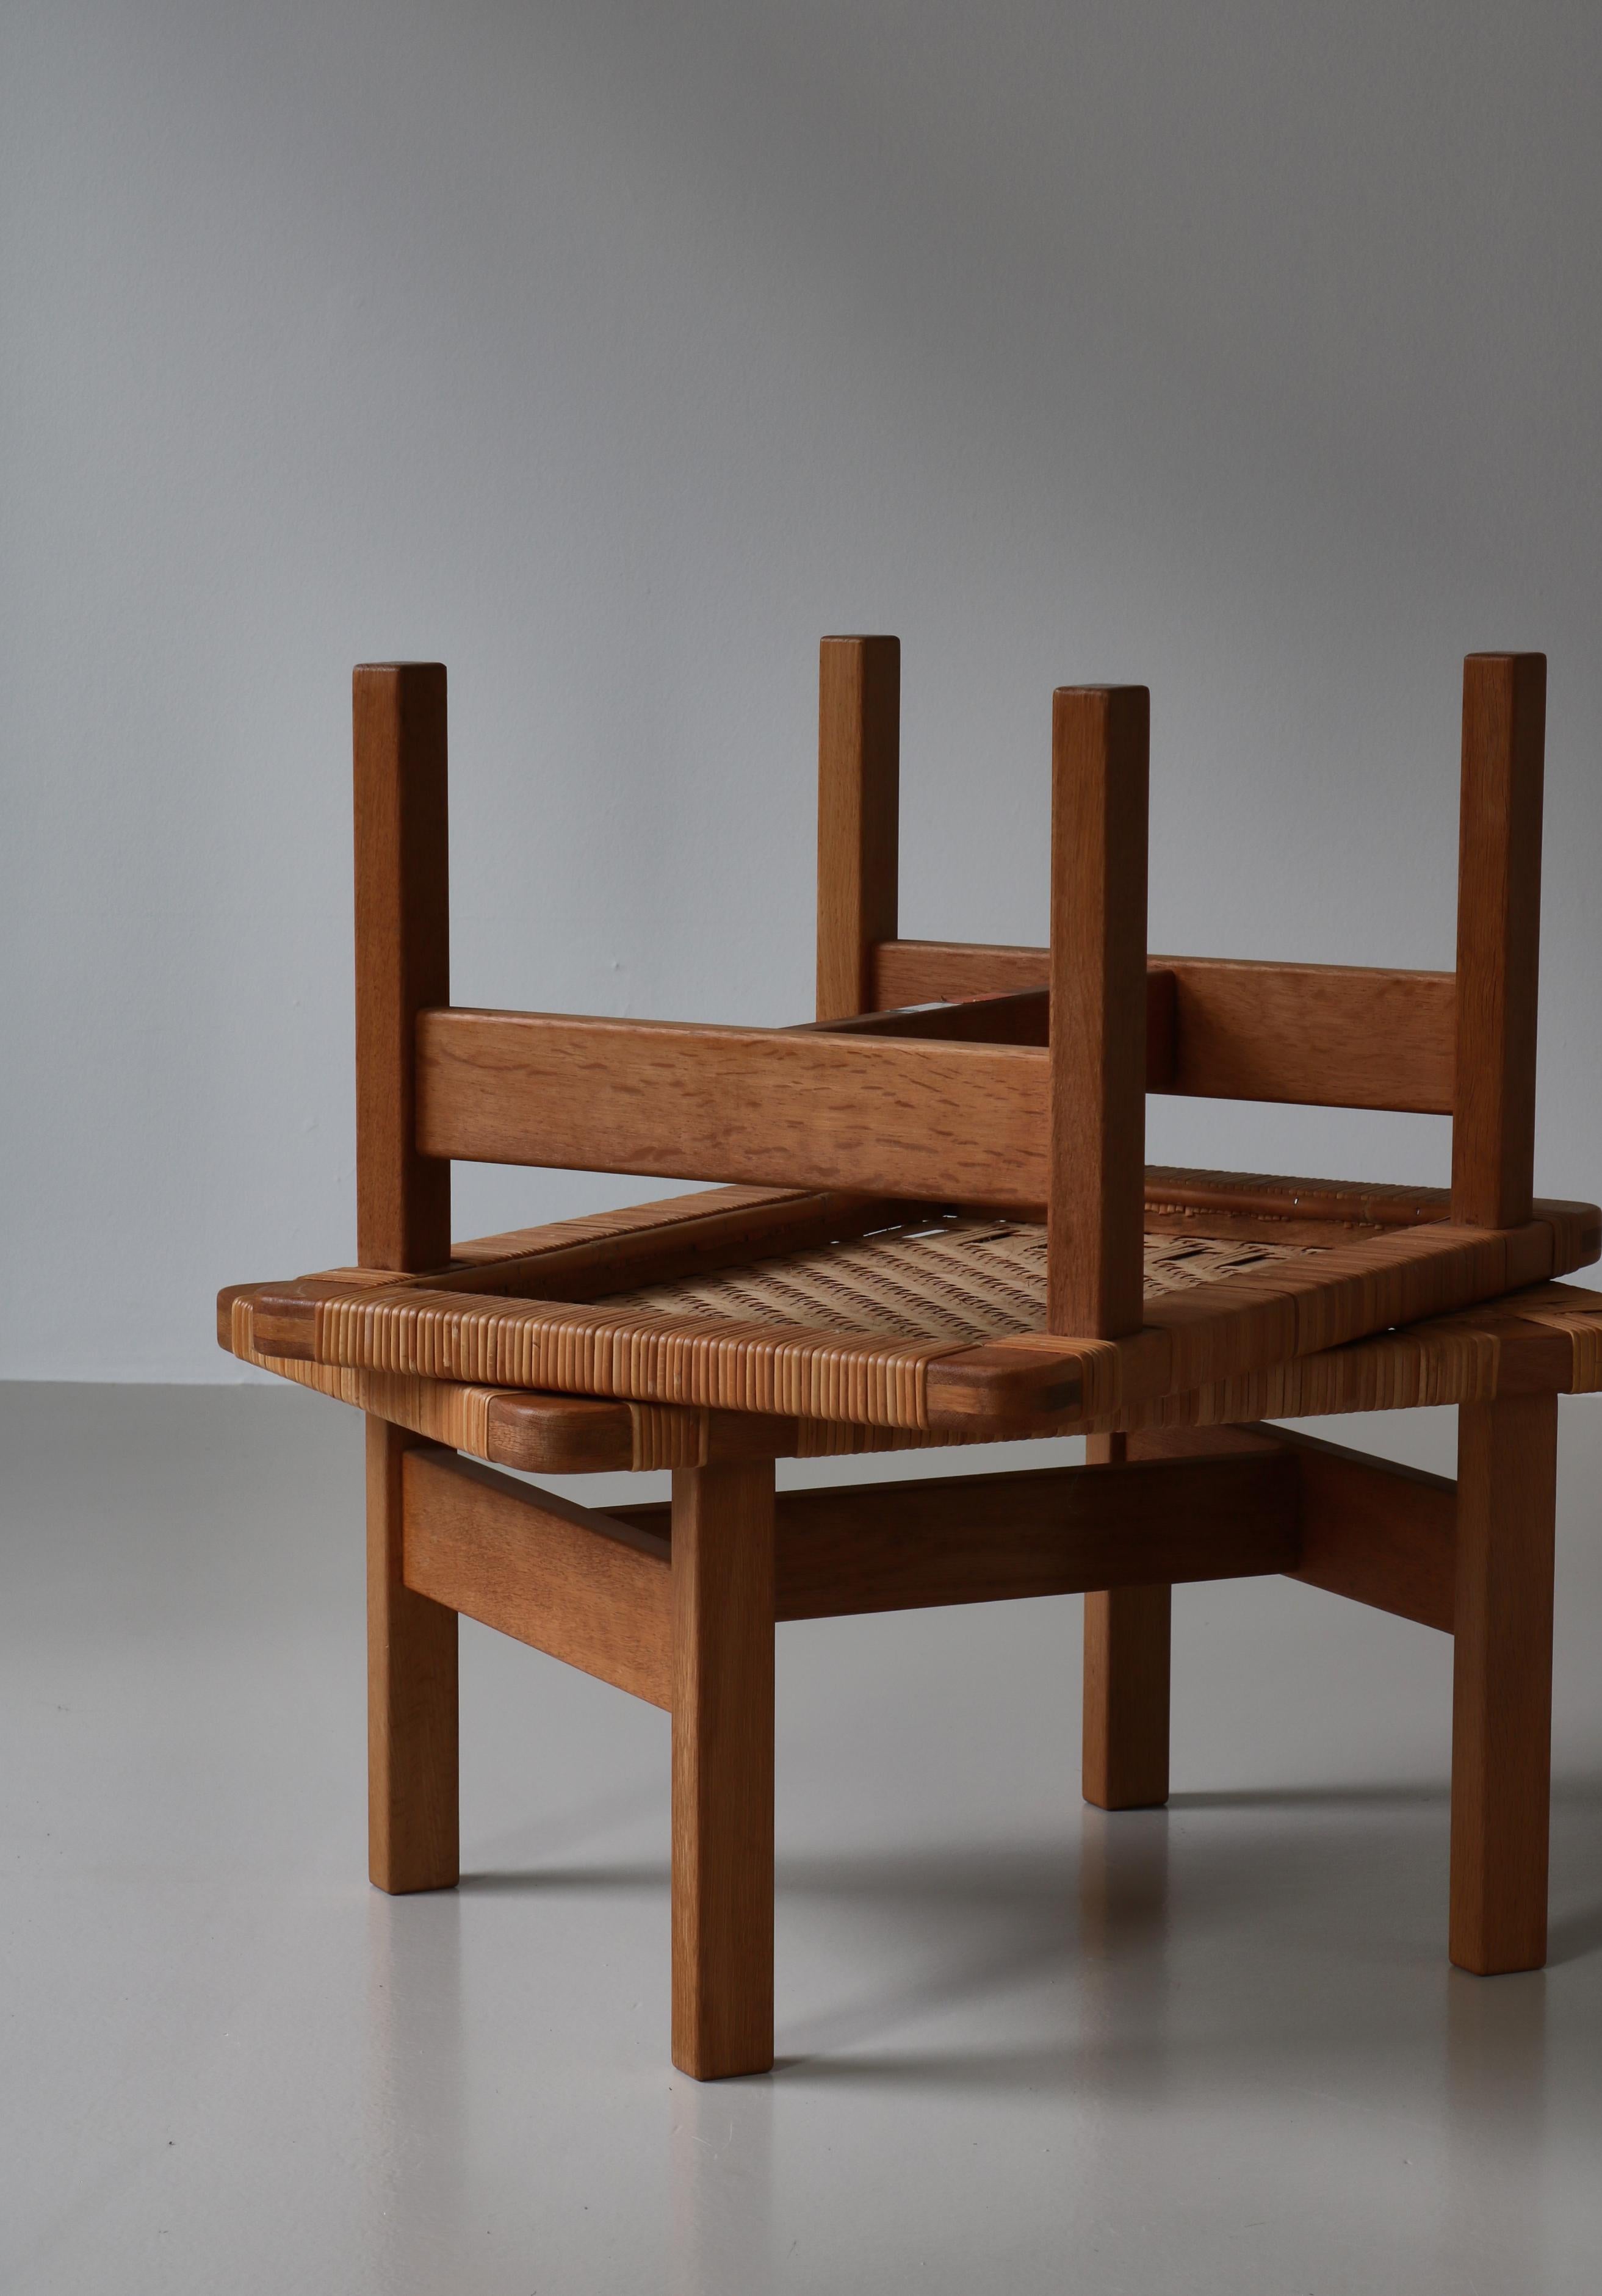 Borge Mogensen Set of Side Tables/Benches in Oak and Rattan Cane, 1960s, Denmark For Sale 7